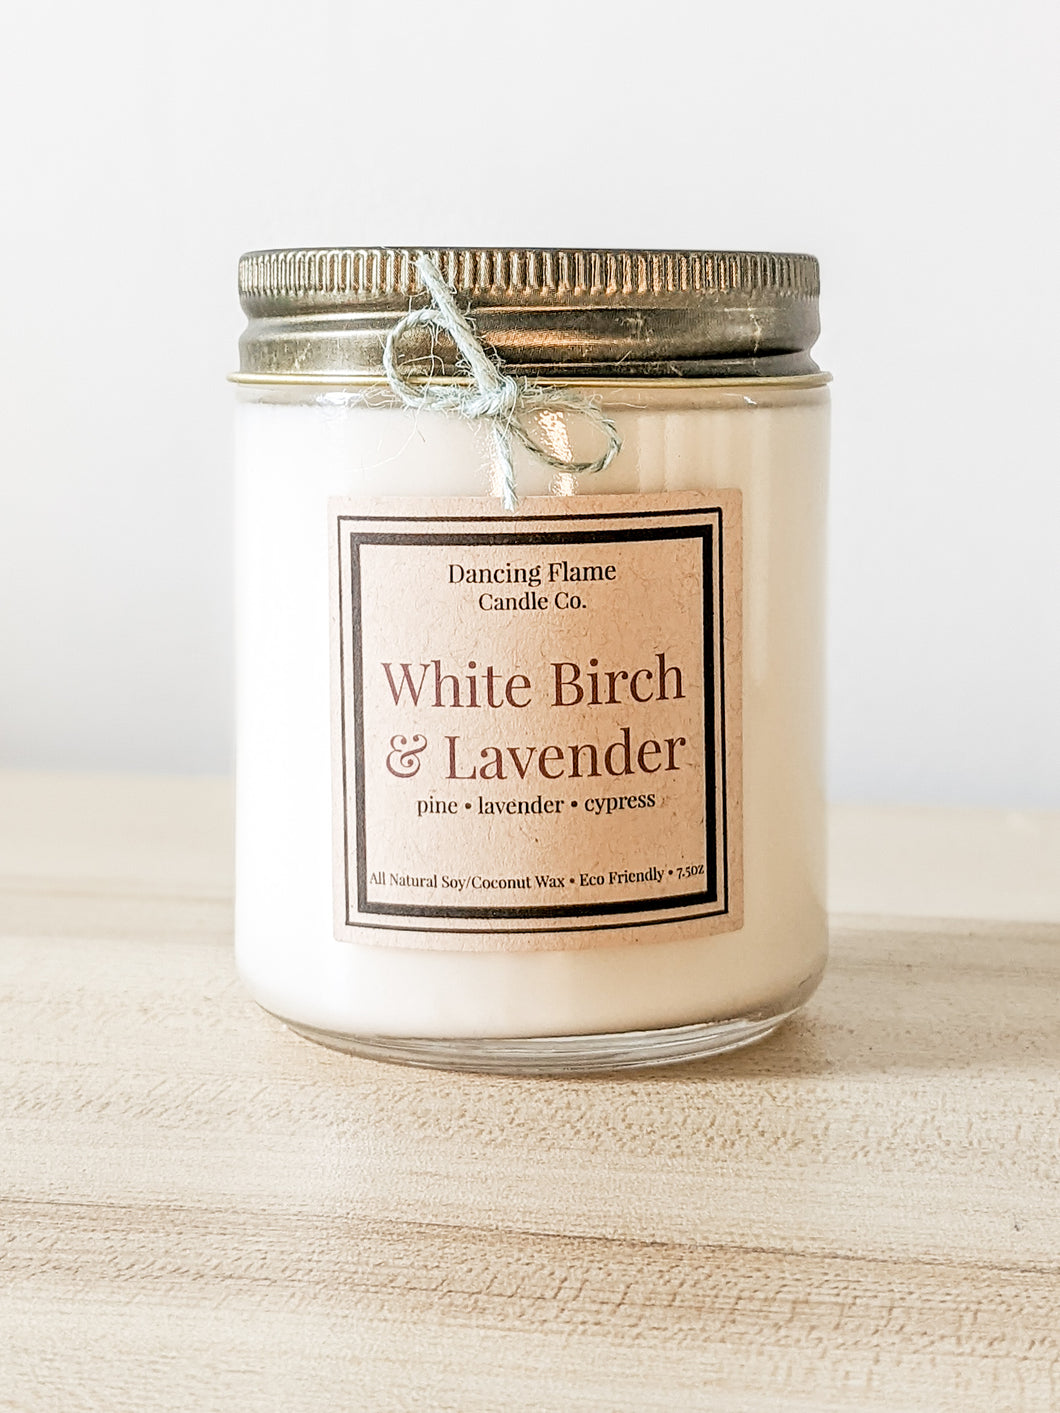 White Birch & Lavender Soy & Coconut Wax Candle